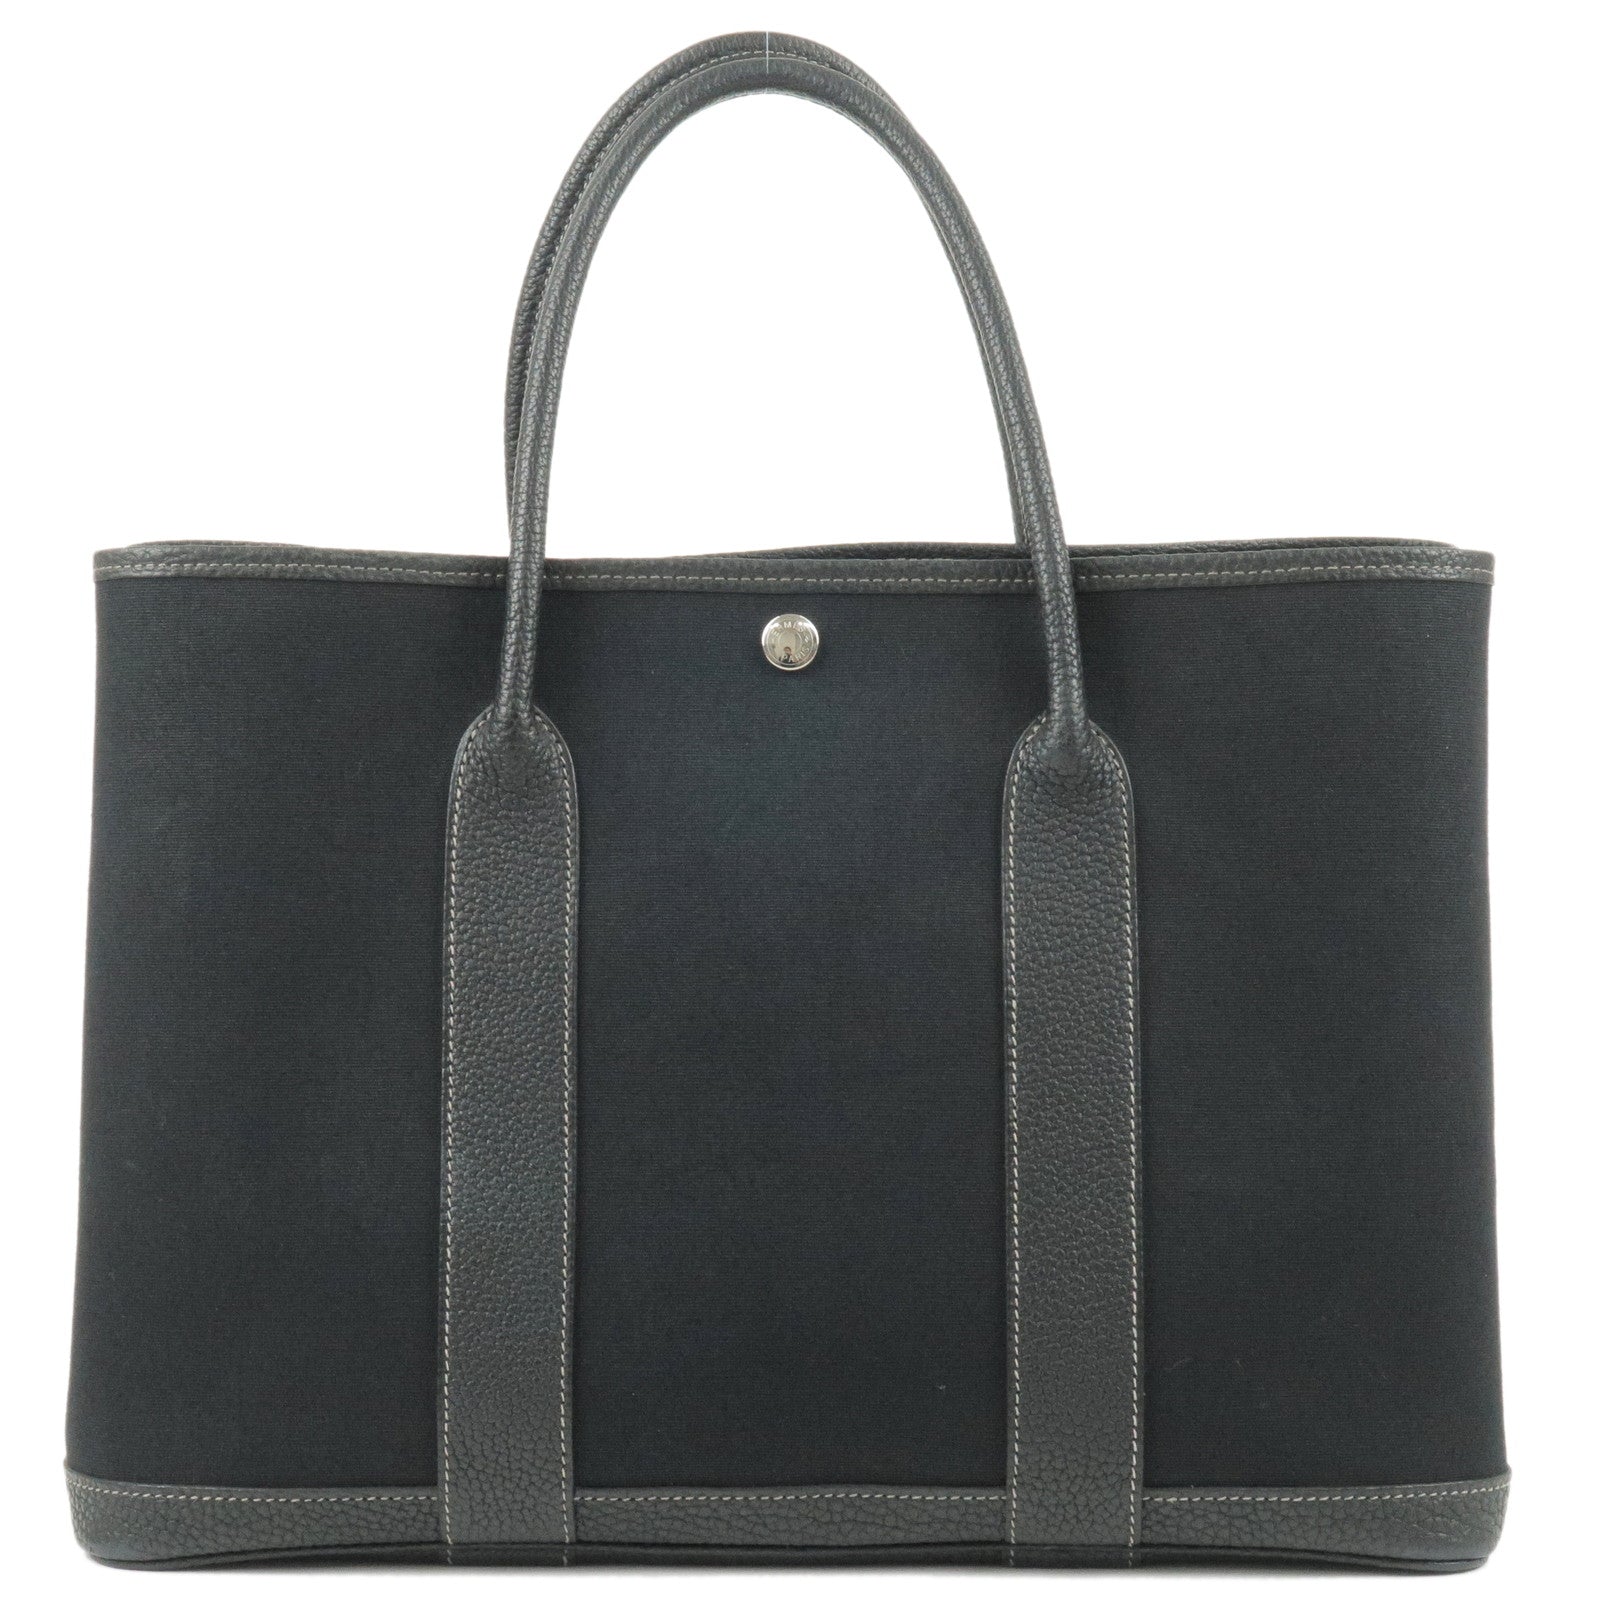 HERMES-Garden-Party-PM-Canvas-Leather-Tote-Bag-Black